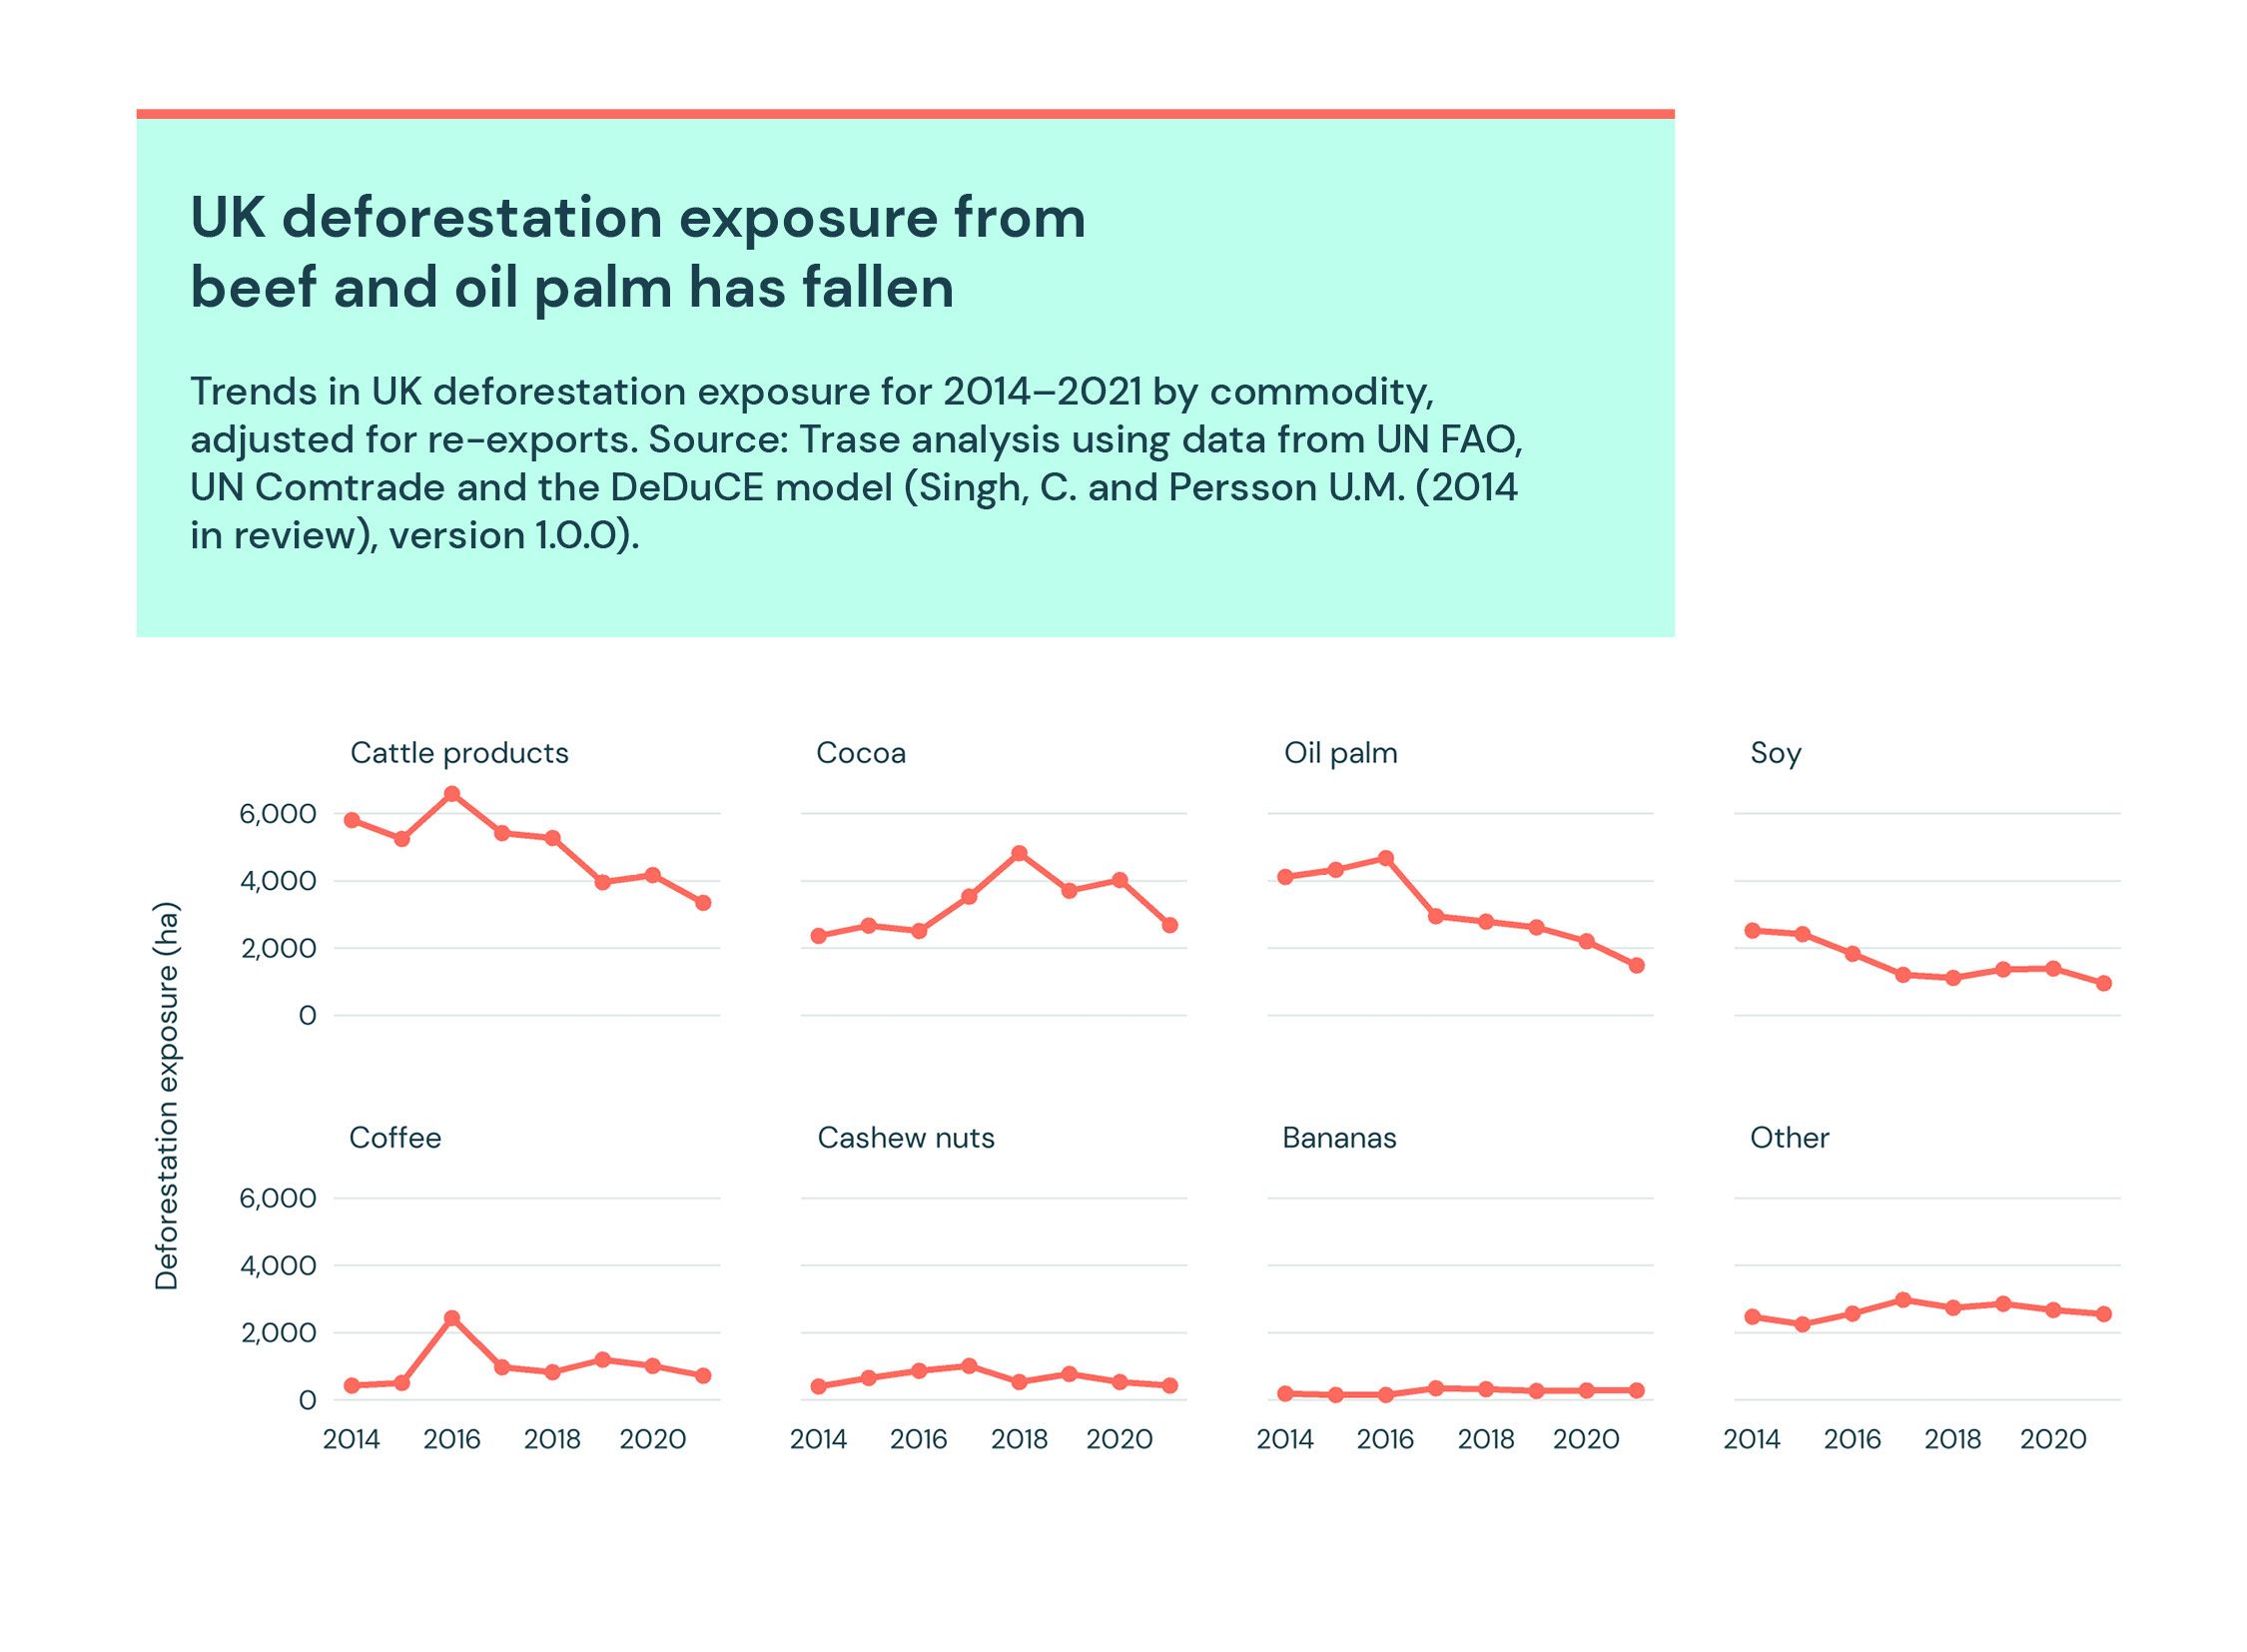 UK deforestation exposure from beef and oil palm has fallen